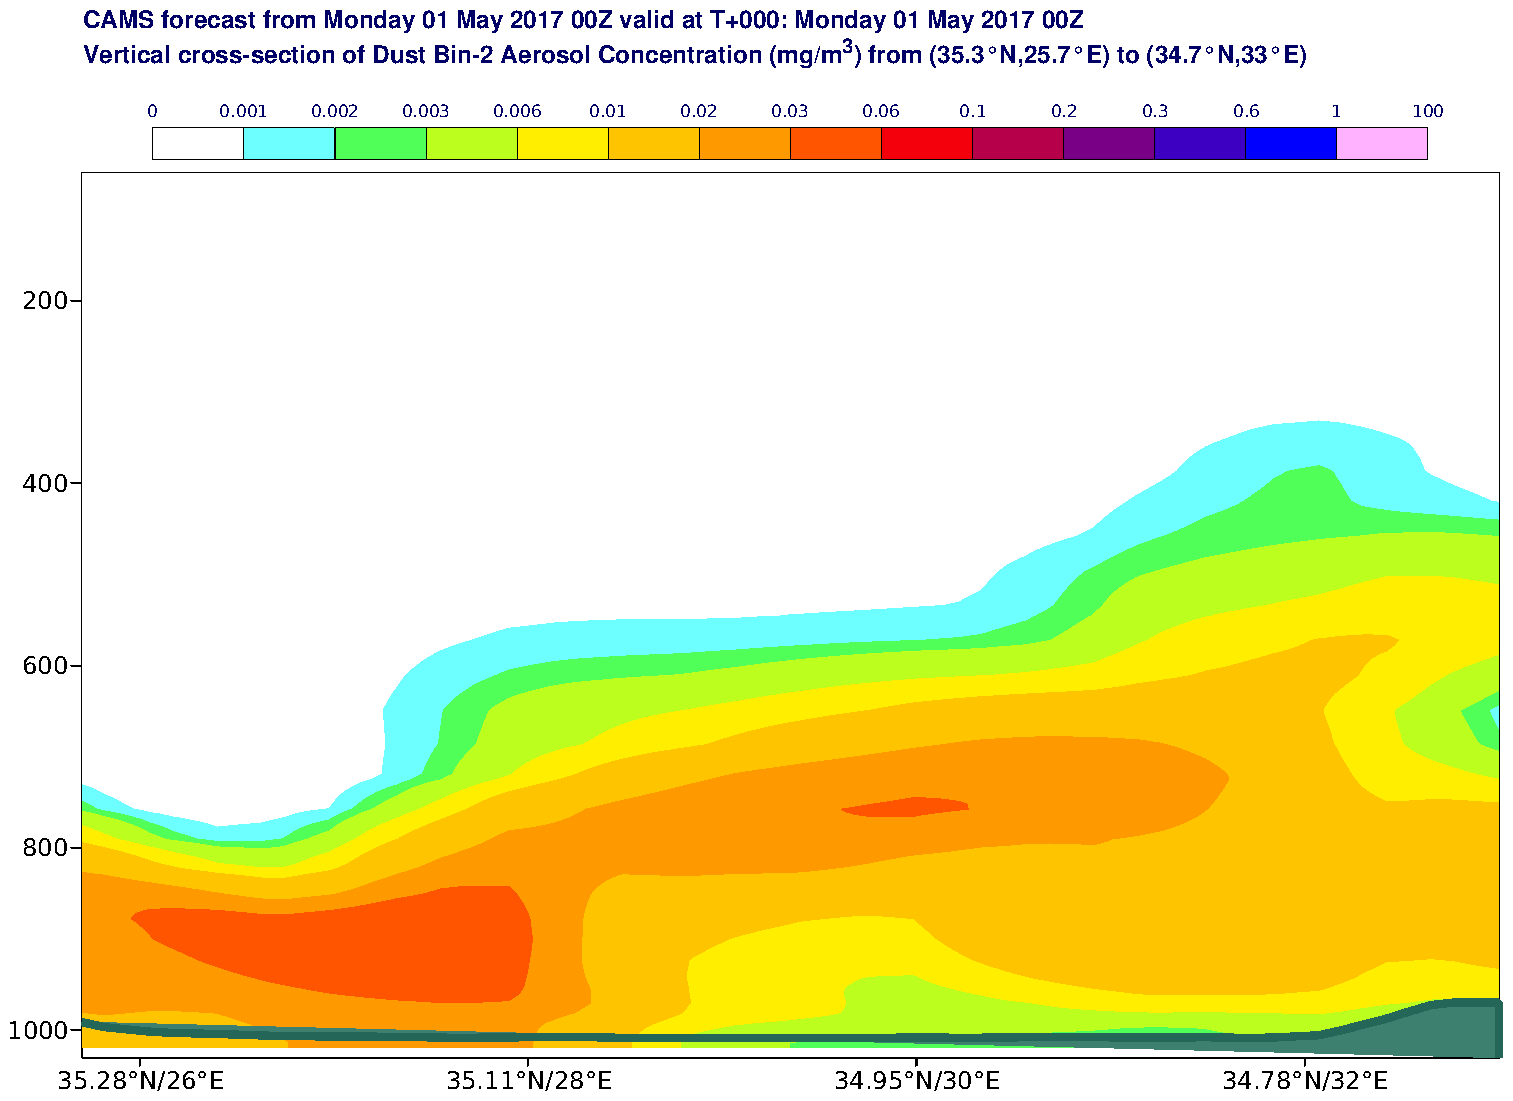 Vertical cross-section of Dust Bin-2 Aerosol Concentration (mg/m3) valid at T0 - 2017-05-01 00:00